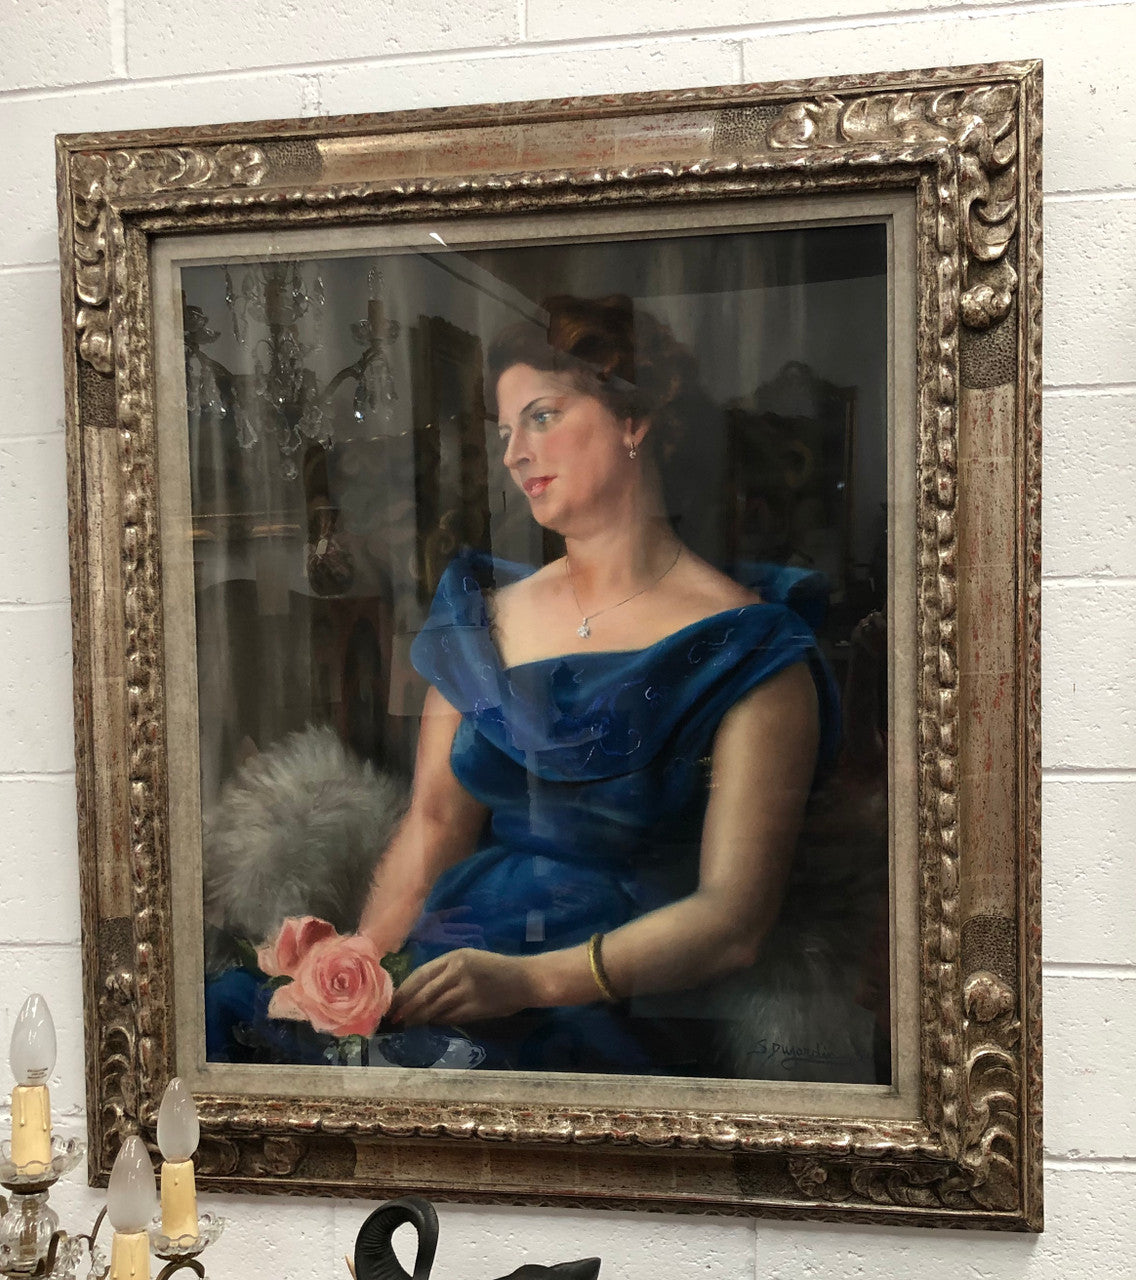 Belgian silver gilt framed pastel of a lady with rose, signed "Simon Dujardin" born 1900. Circa 1950's. Being a pastel artwork it is under glass to protect it.